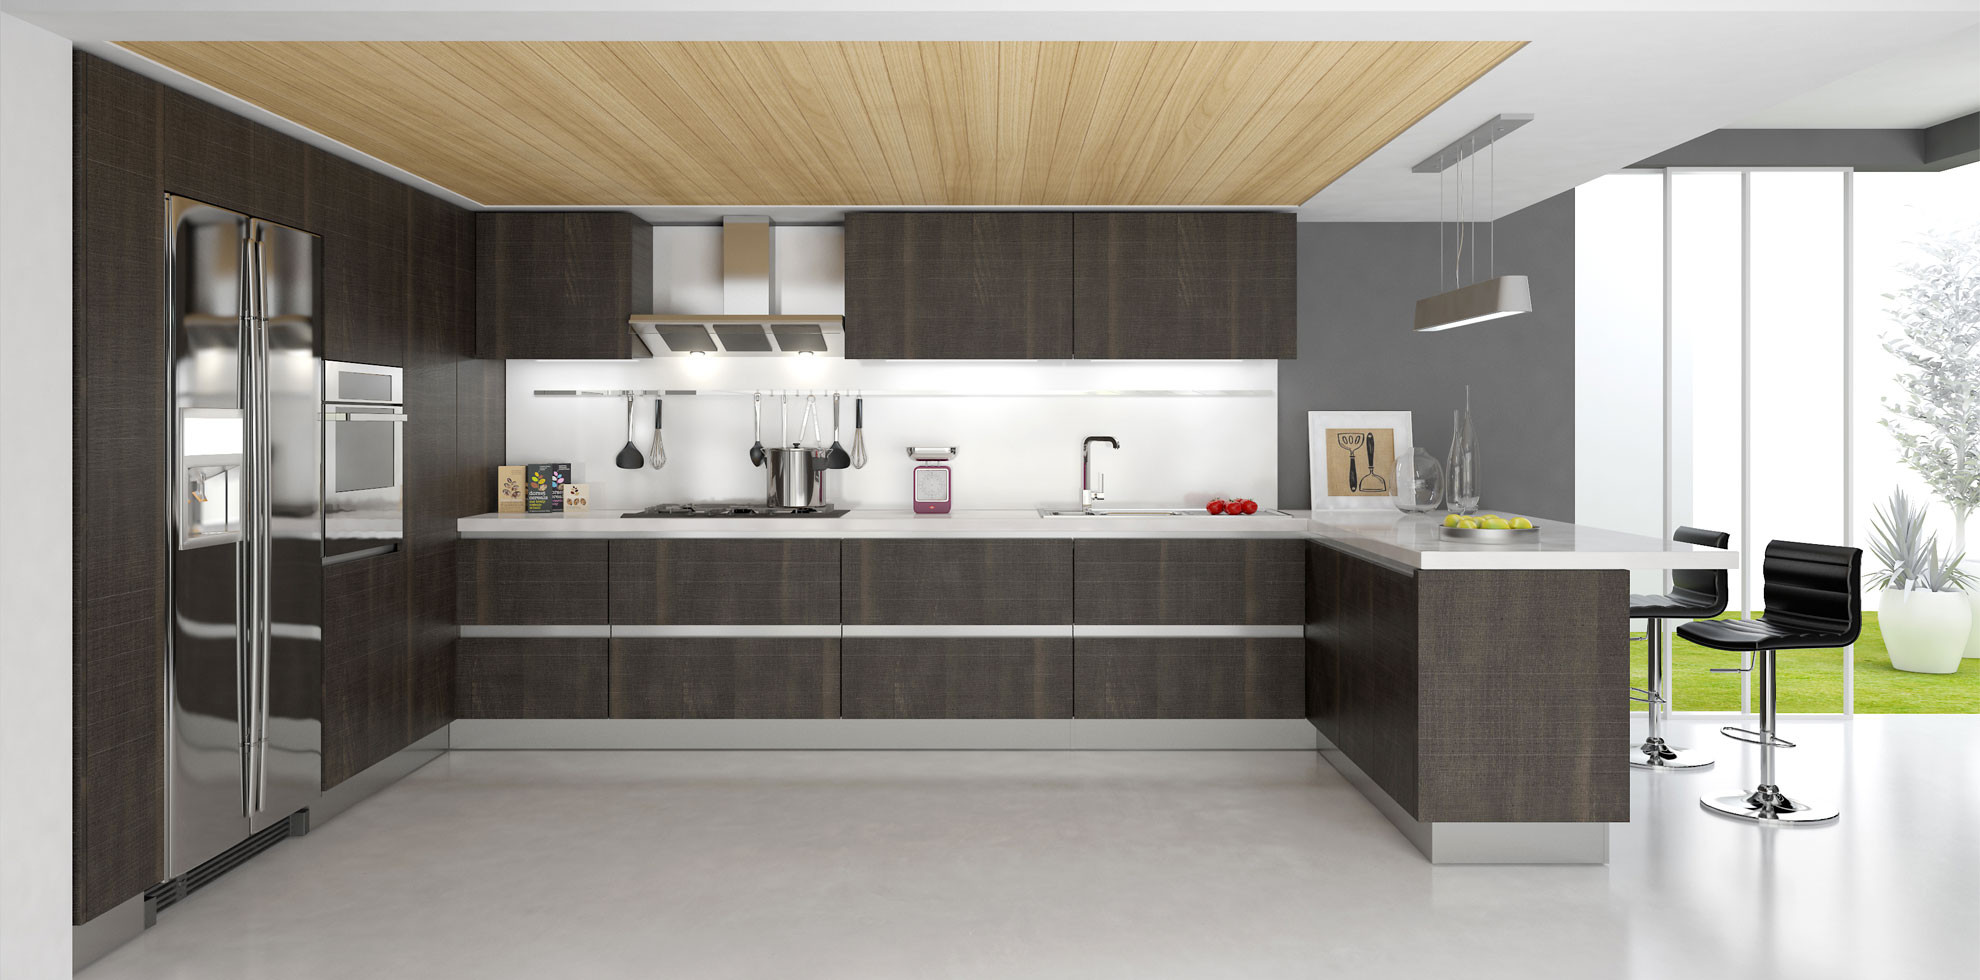 Modern Kitchen Hutch
 20 Prime Examples of Modern Kitchen Cabinets